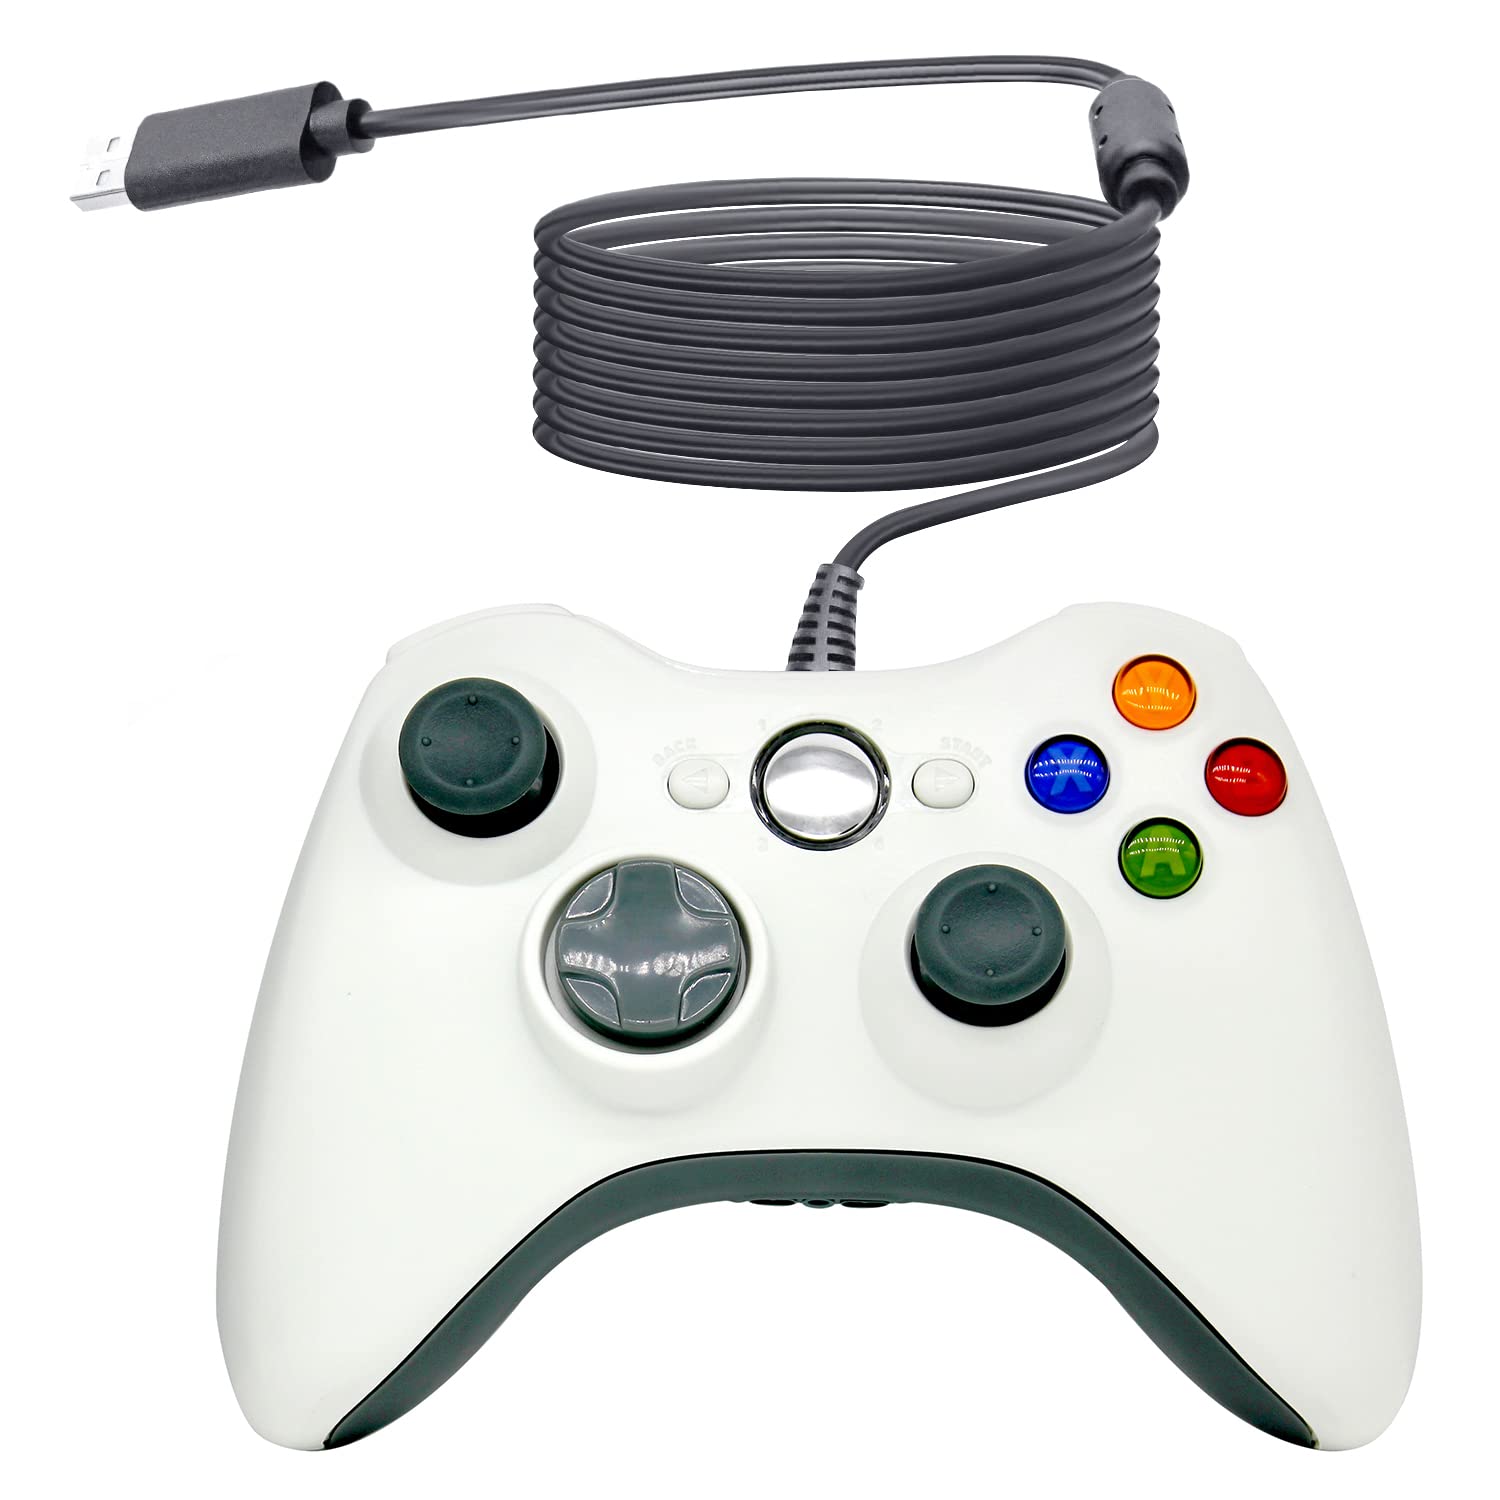 OSTENT Wired USB Controller Gamepad Joystick for Microsoft Xbox 360 Console Windows PC Laptop Computer Video Game Color White